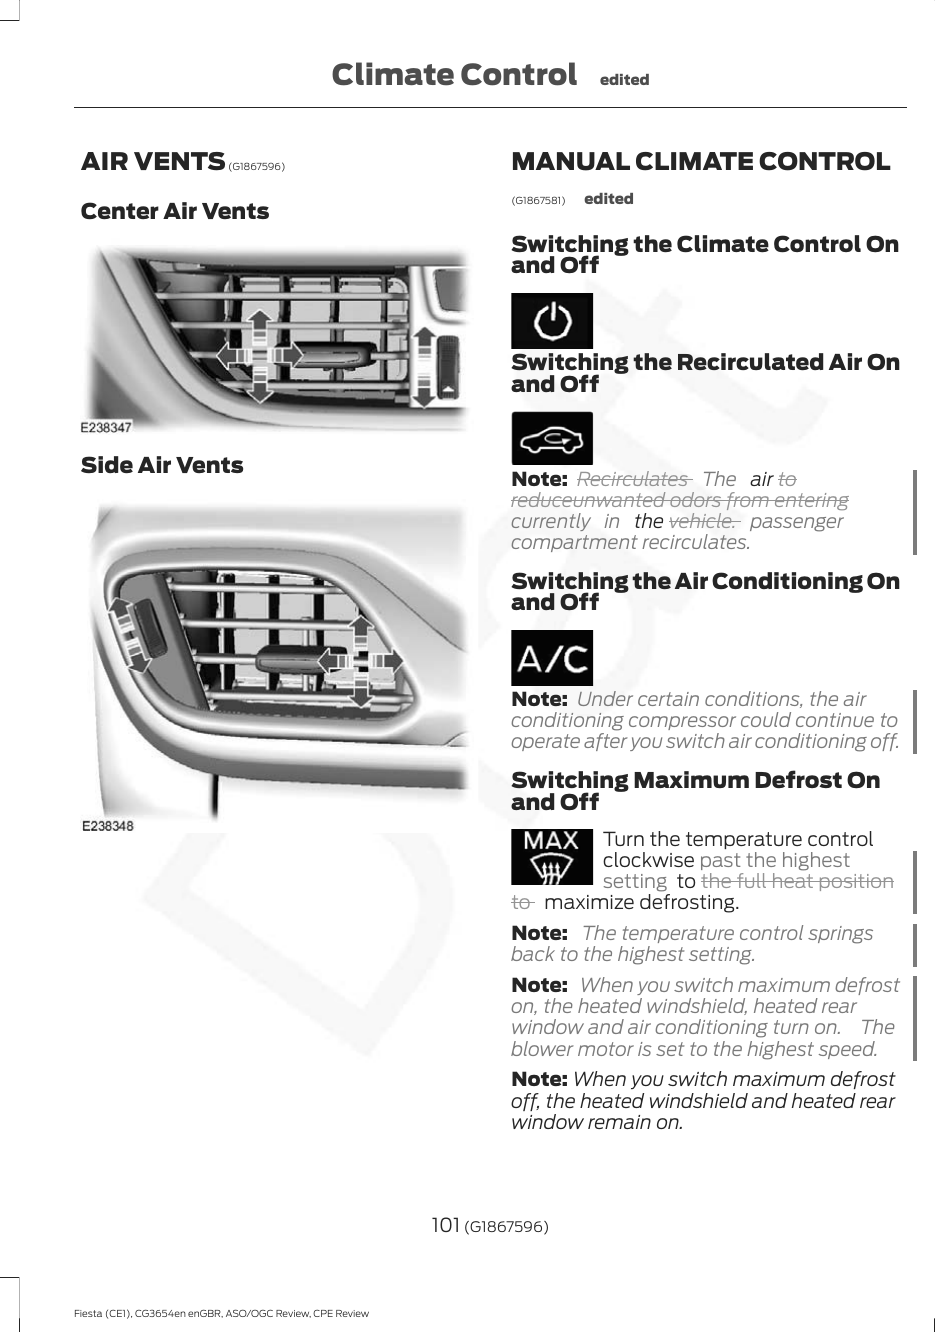 AIR VENTS (G1867596)Center Air VentsSide Air VentsMANUAL CLIMATE CONTROL(G1867581) editedSwitching the Climate Control Onand OffSwitching the Recirculated Air Onand OffNote: Recirculates  The   air toreduceunwanted odors from enteringcurrently in  the vehicle. passengercompartment recirculates.Switching the Air Conditioning Onand OffNote: Under certain conditions, the airconditioning compressor could continue tooperate after you switch air conditioning off.Switching Maximum Defrost Onand OffTurn the temperature controlclockwise past the highestsetting  to the full heat positionto   maximize defrosting.Note:  The temperature control springsback to the highest setting.Note:  When you switch maximum defroston, the heated windshield, heated rearwindow and air conditioning turn on.  Theblower motor is set to the highest speed.Note: When you switch maximum defrostoff, the heated windshield and heated rearwindow remain on.101 (G1867596)Fiesta (CE1), CG3654en enGBR, ASO/OGC Review, CPE ReviewClimate Control edited